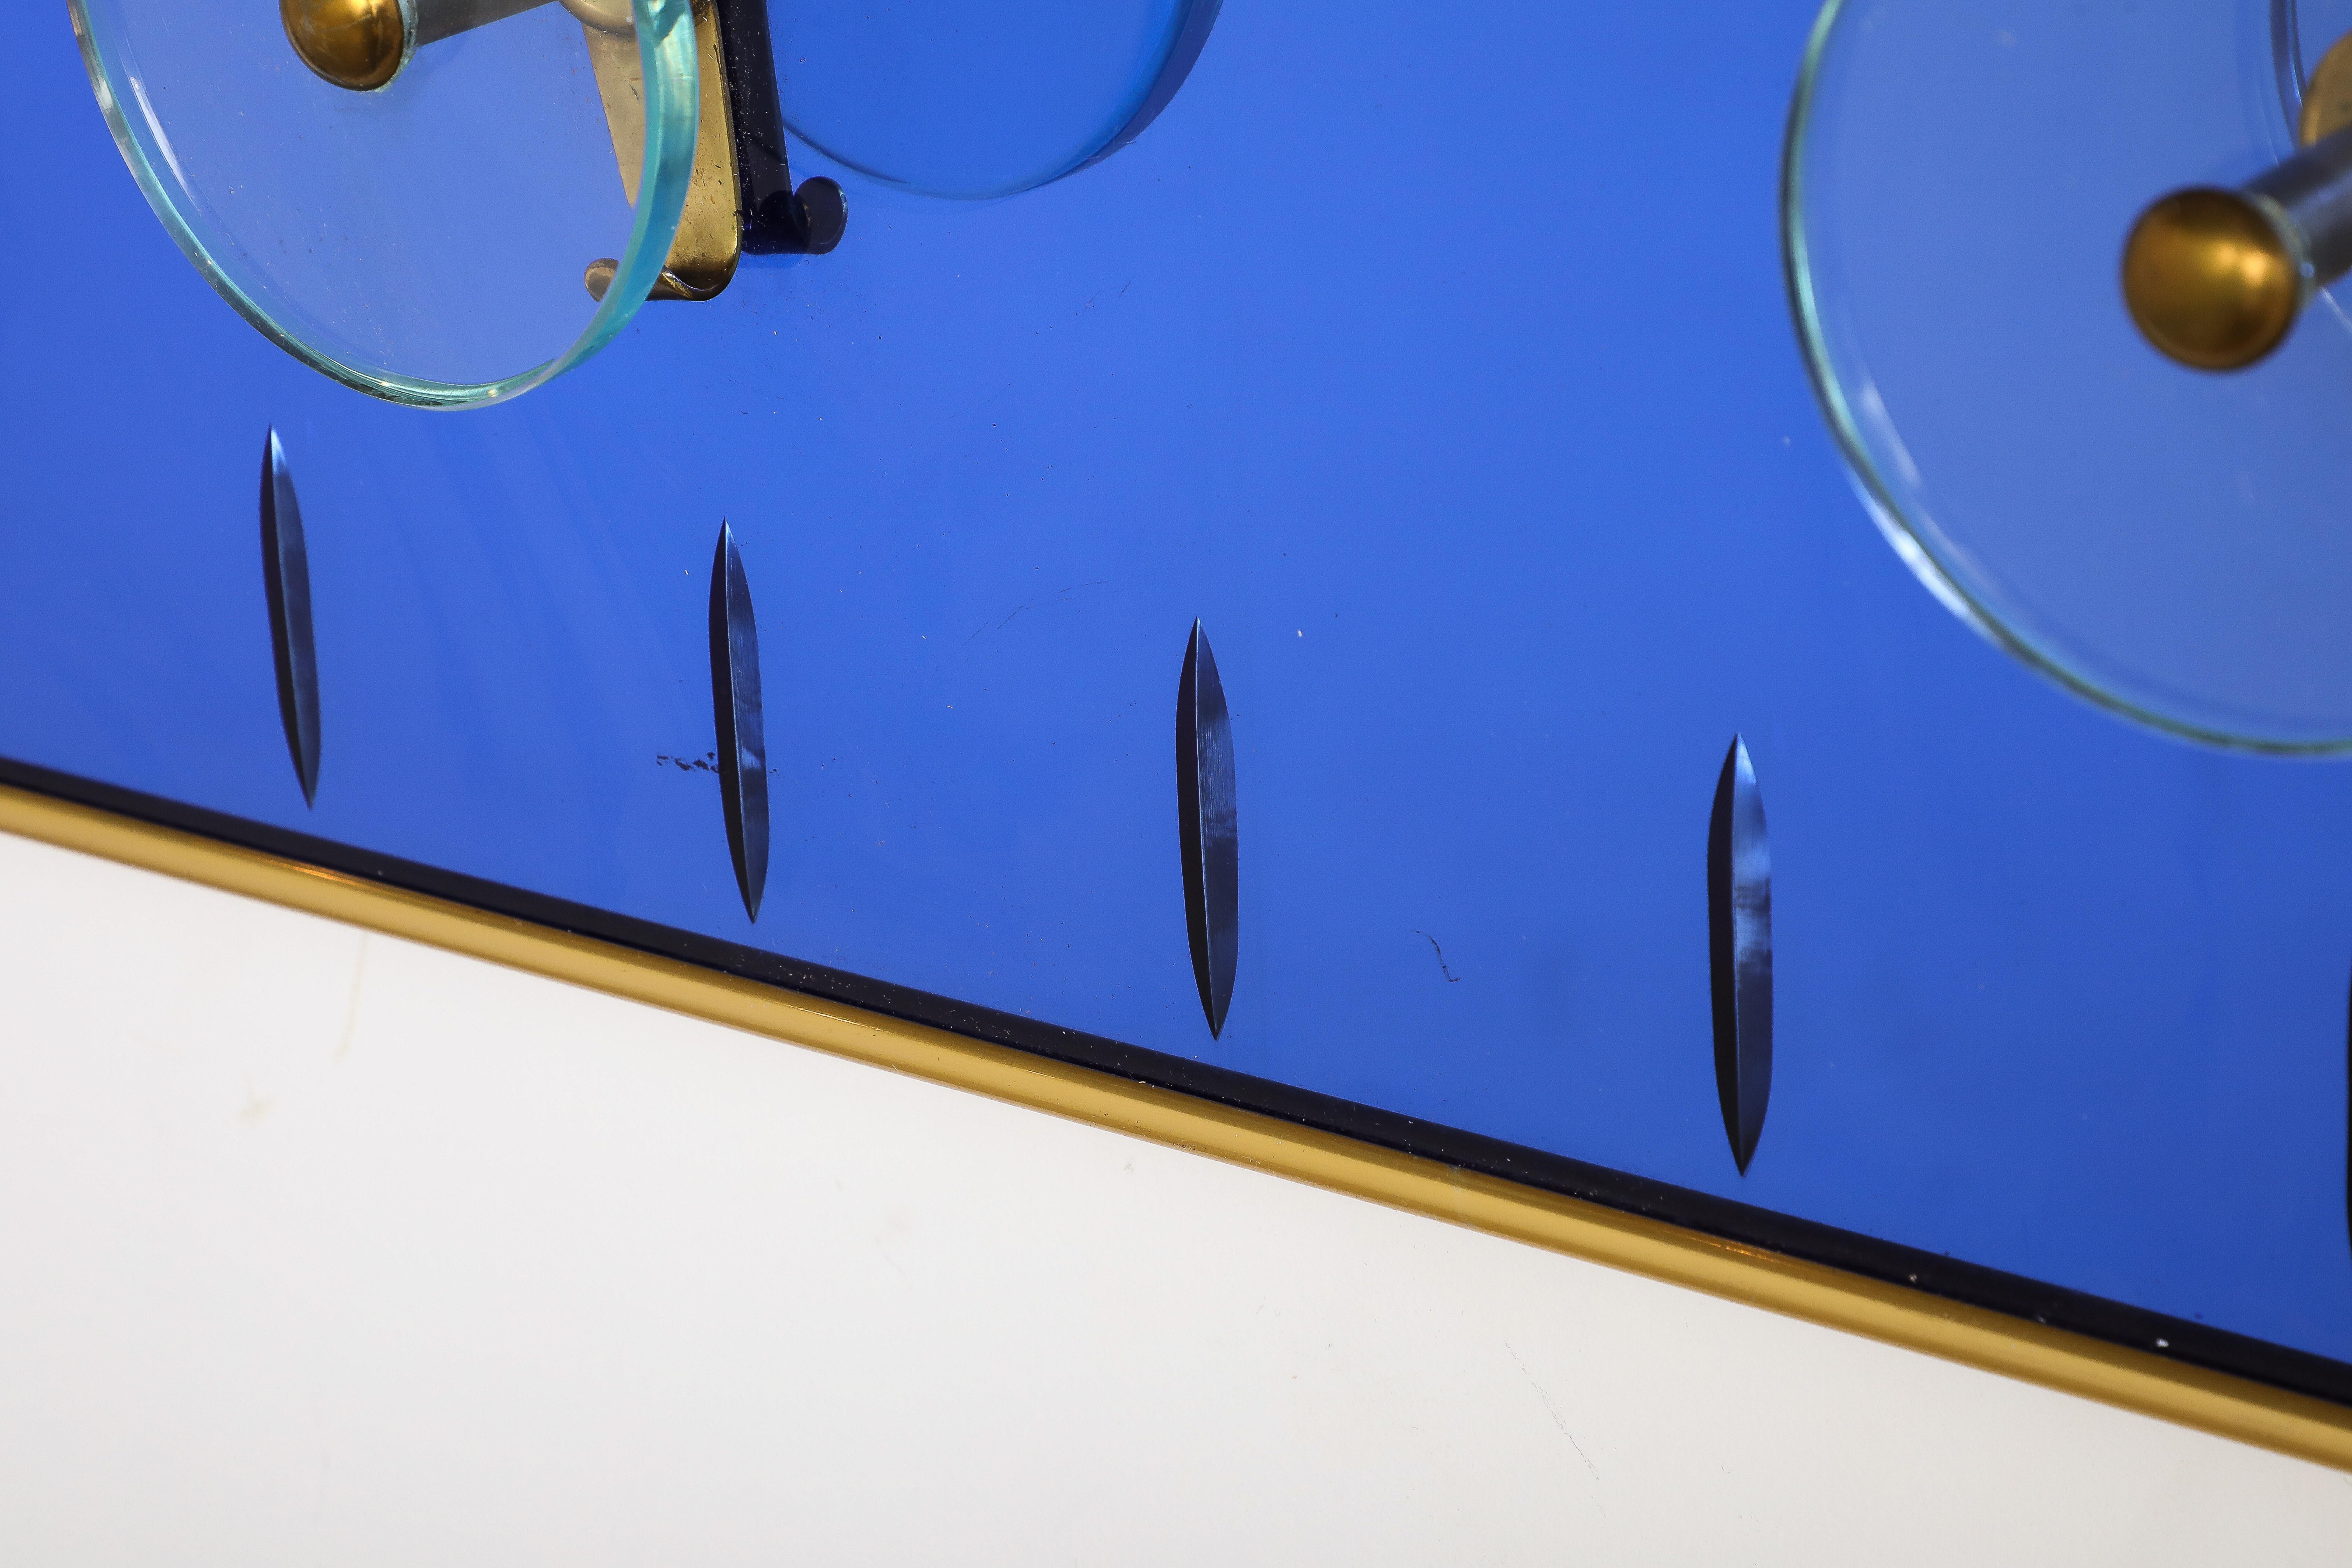 Mid-20th Century Cristal Art Wall Mounted Blue Glass Coat or Hat Rack, Turin Italy, circa 1950's  For Sale